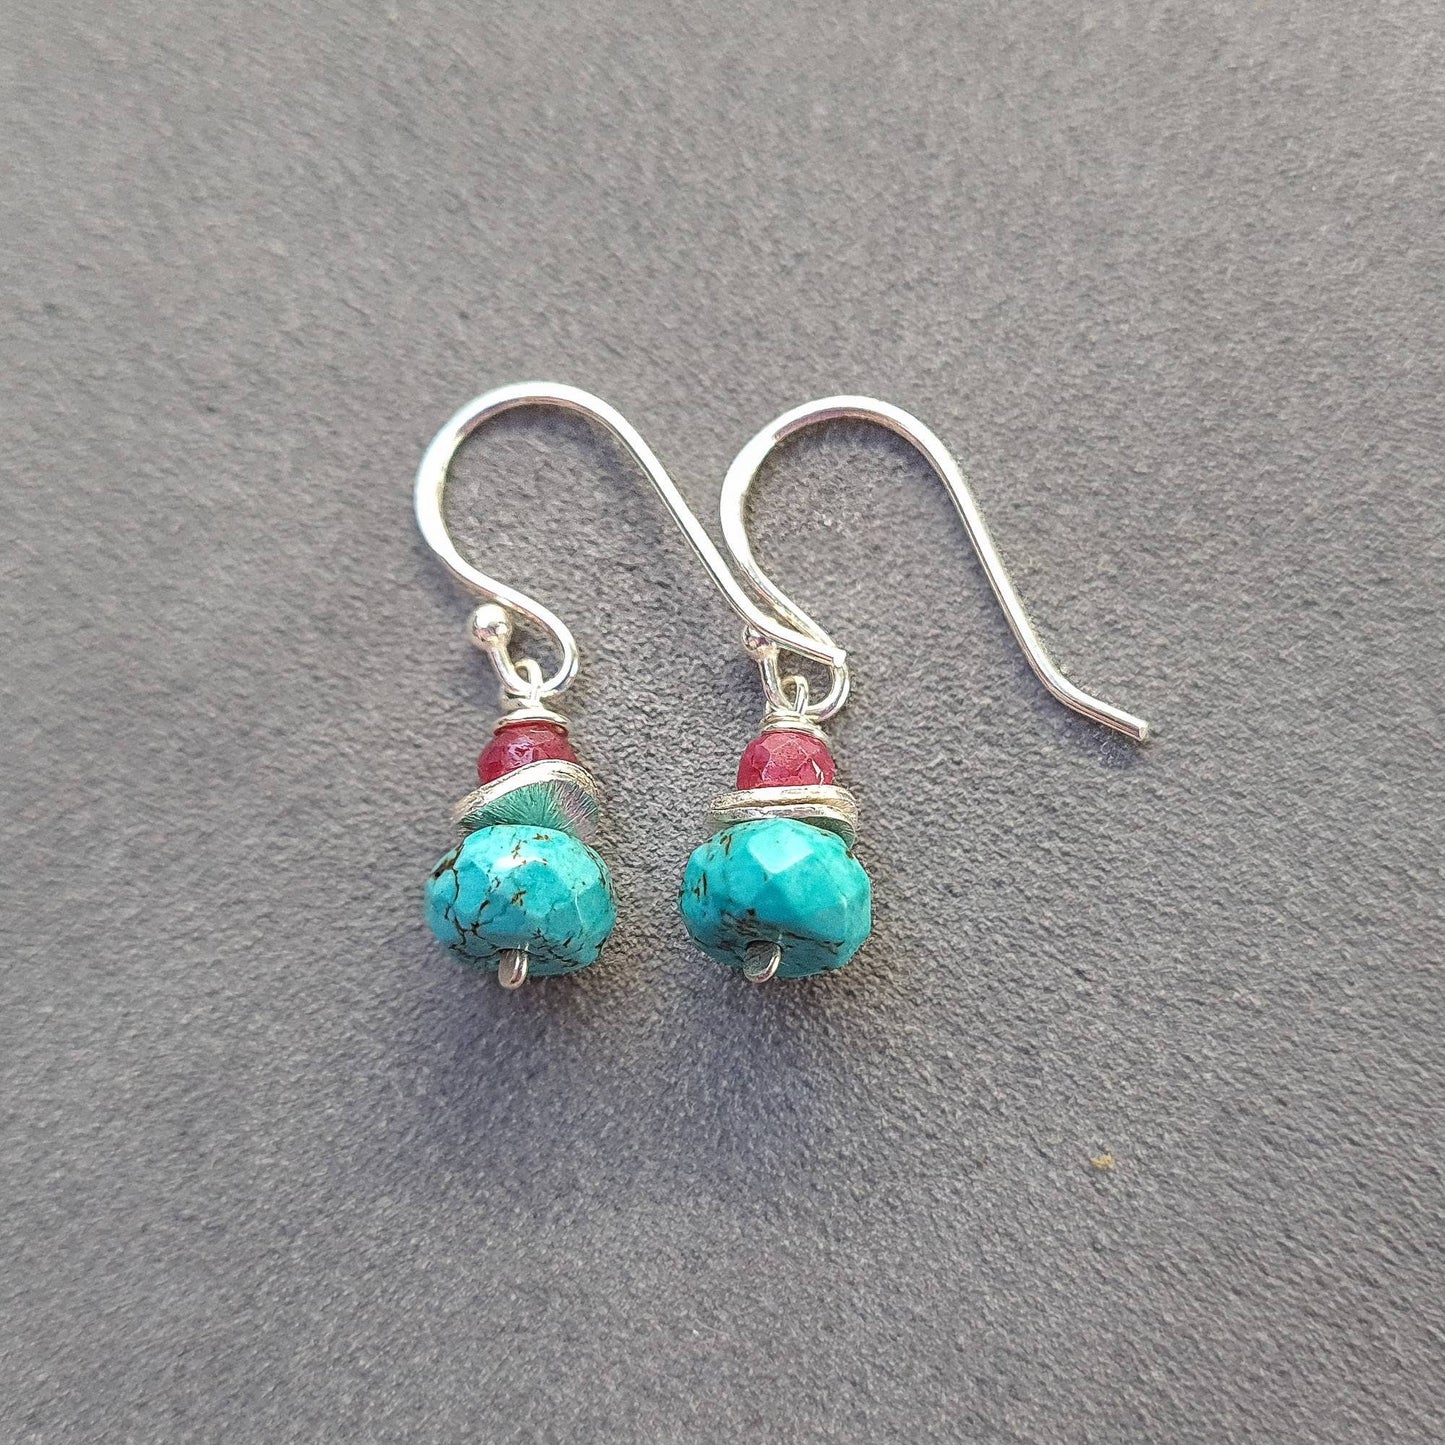 Turquoise and ruby drop earrings in sterling silver